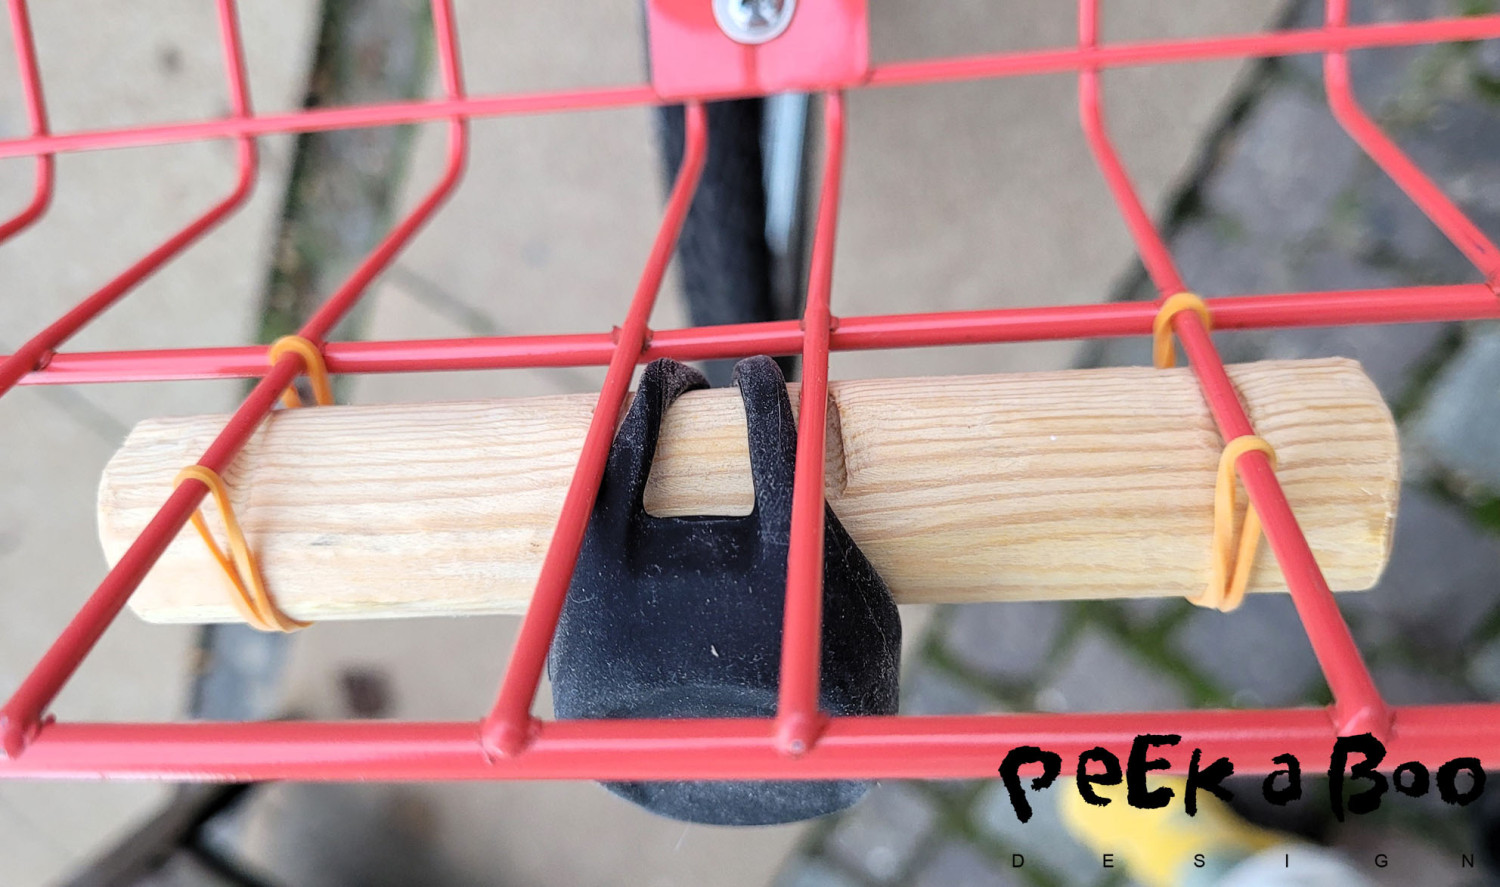 Place your light on the middle of the wooden stick. And make sure the grooves are correct matching the baskets wire.